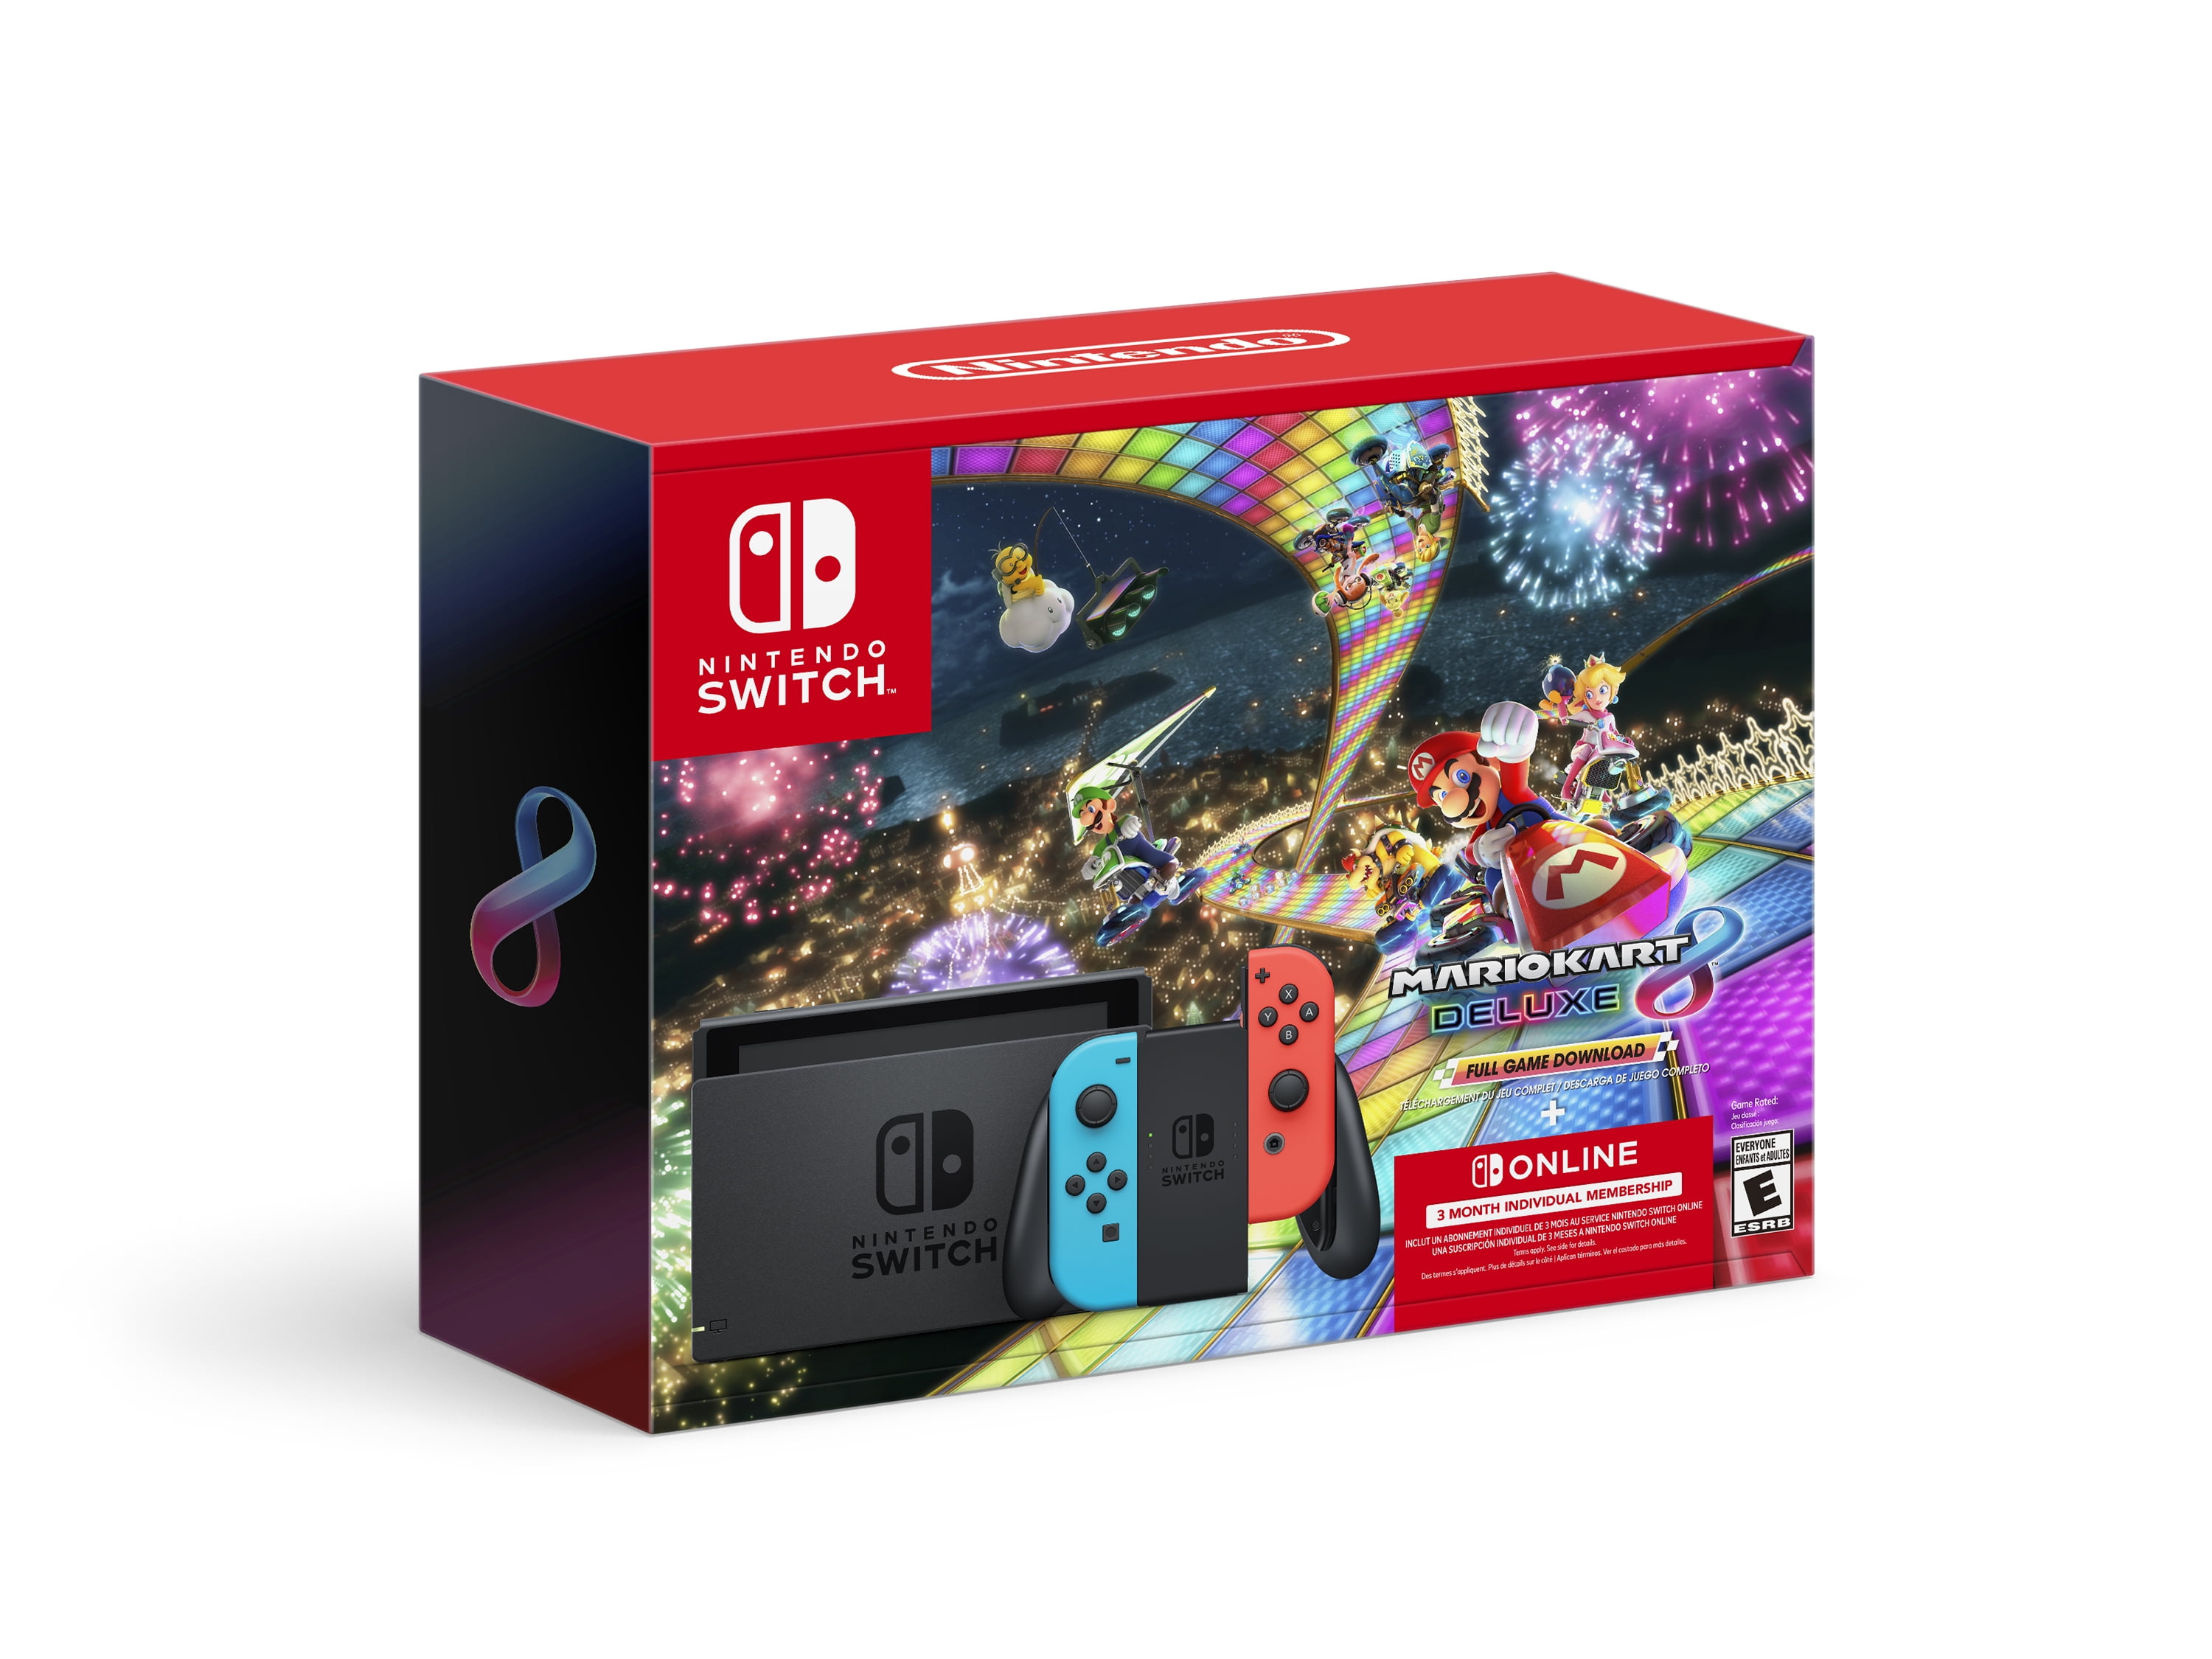 Nintendo Switch with Neon Blue & Neon Red Joy-Con + Mario Kart 8 Deluxe (Full Game Download)